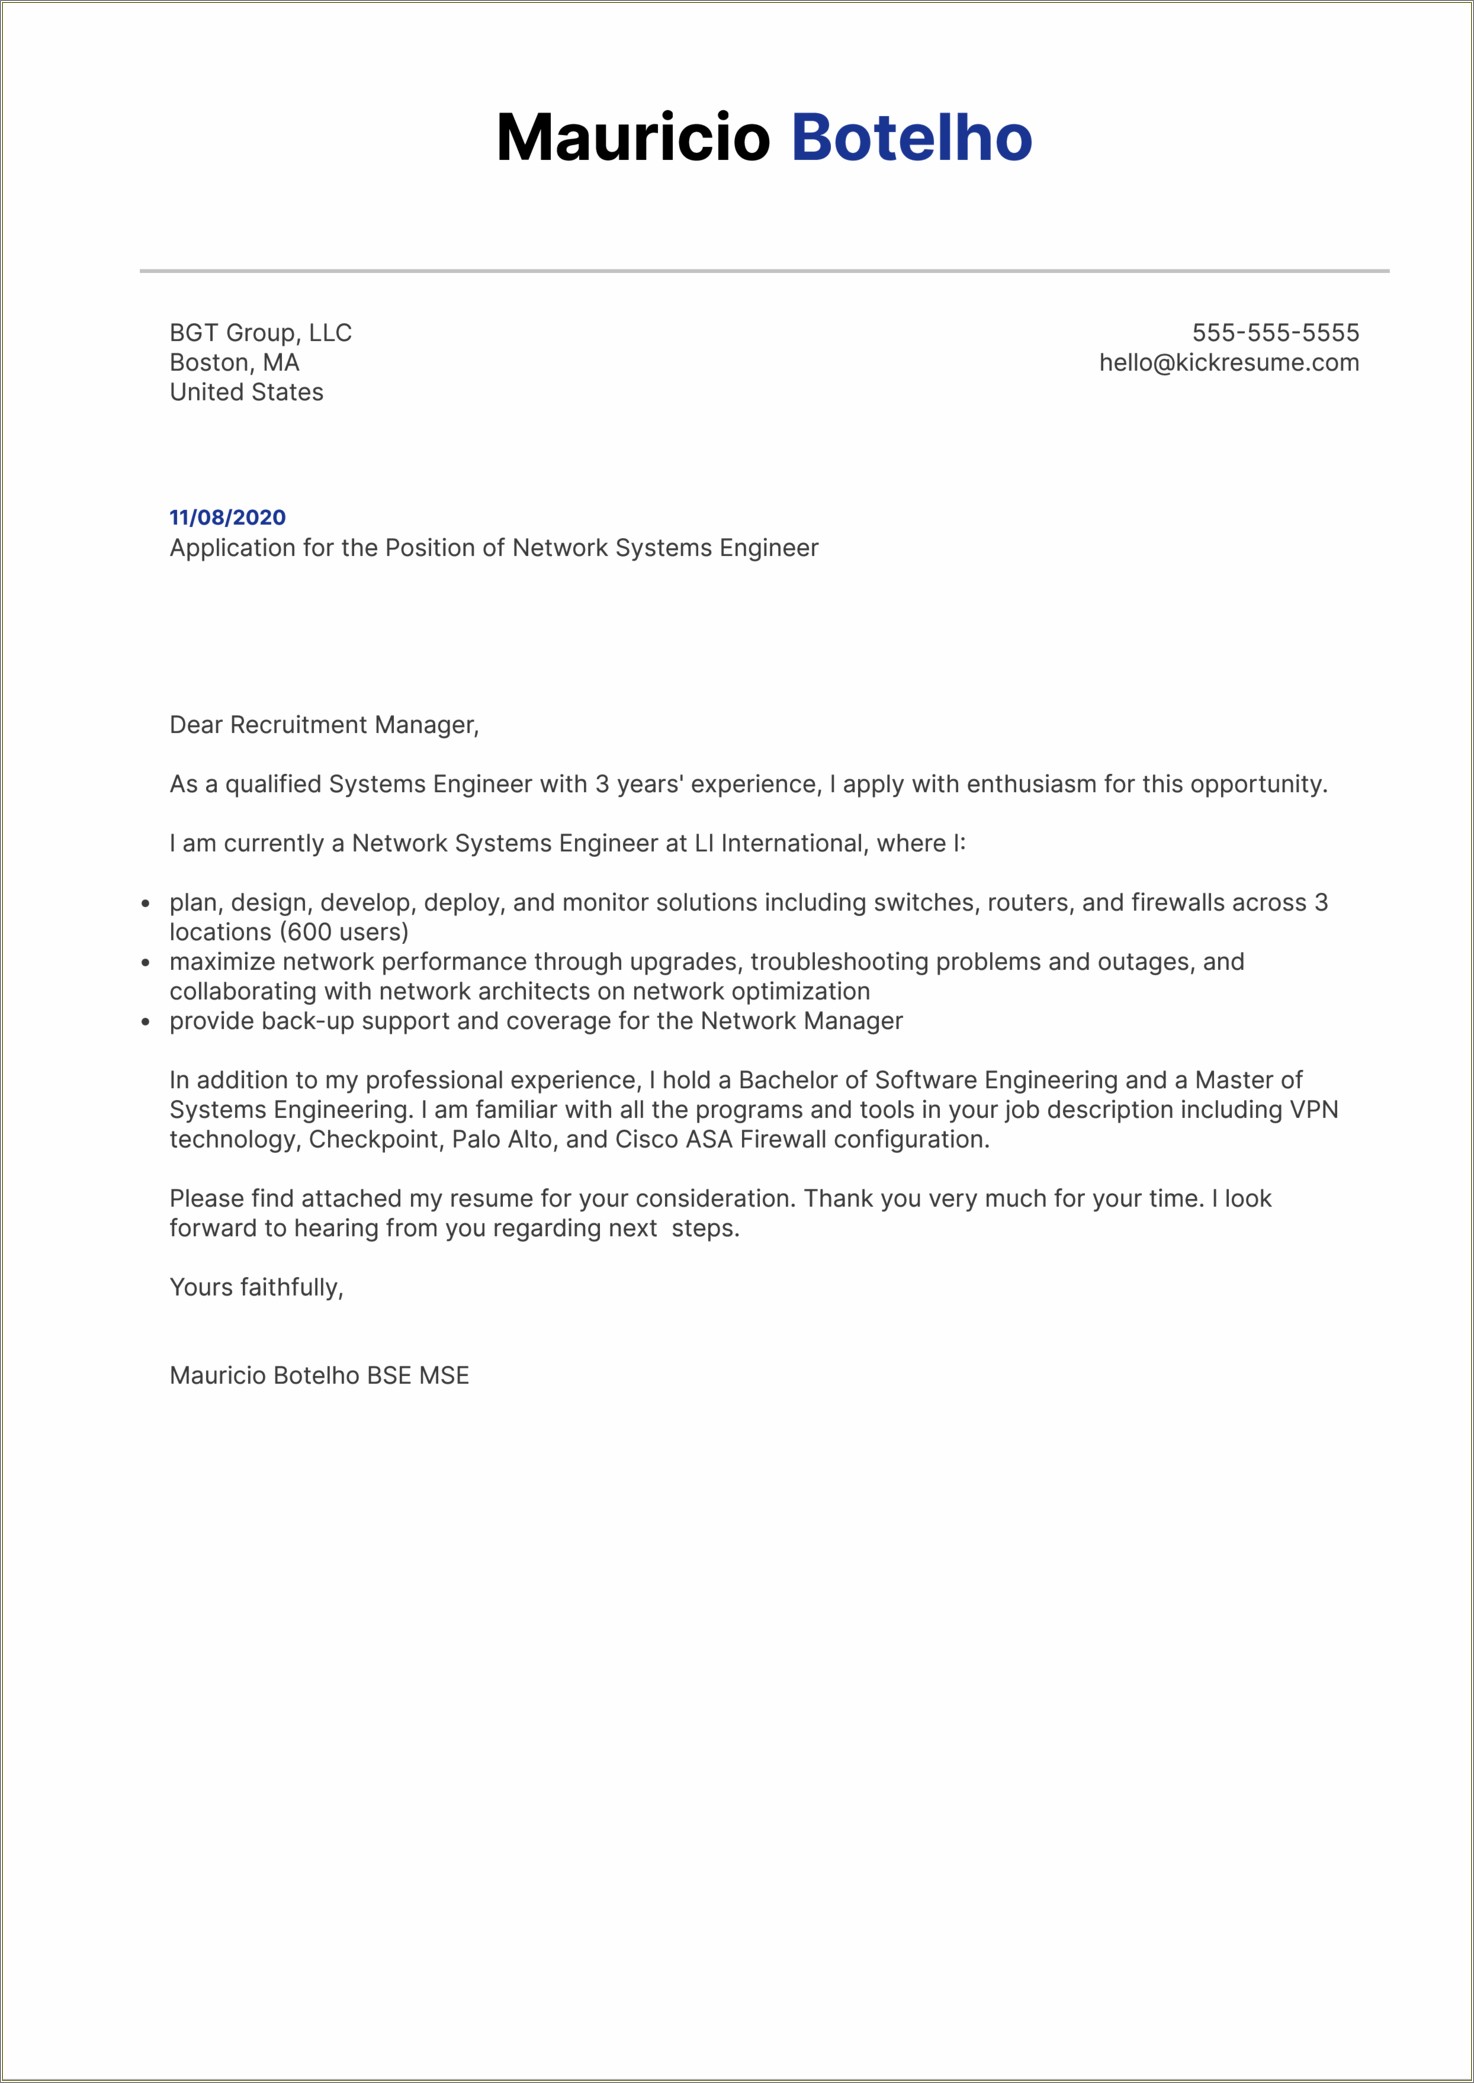 Network Engineer Resume With 3 Year Experience